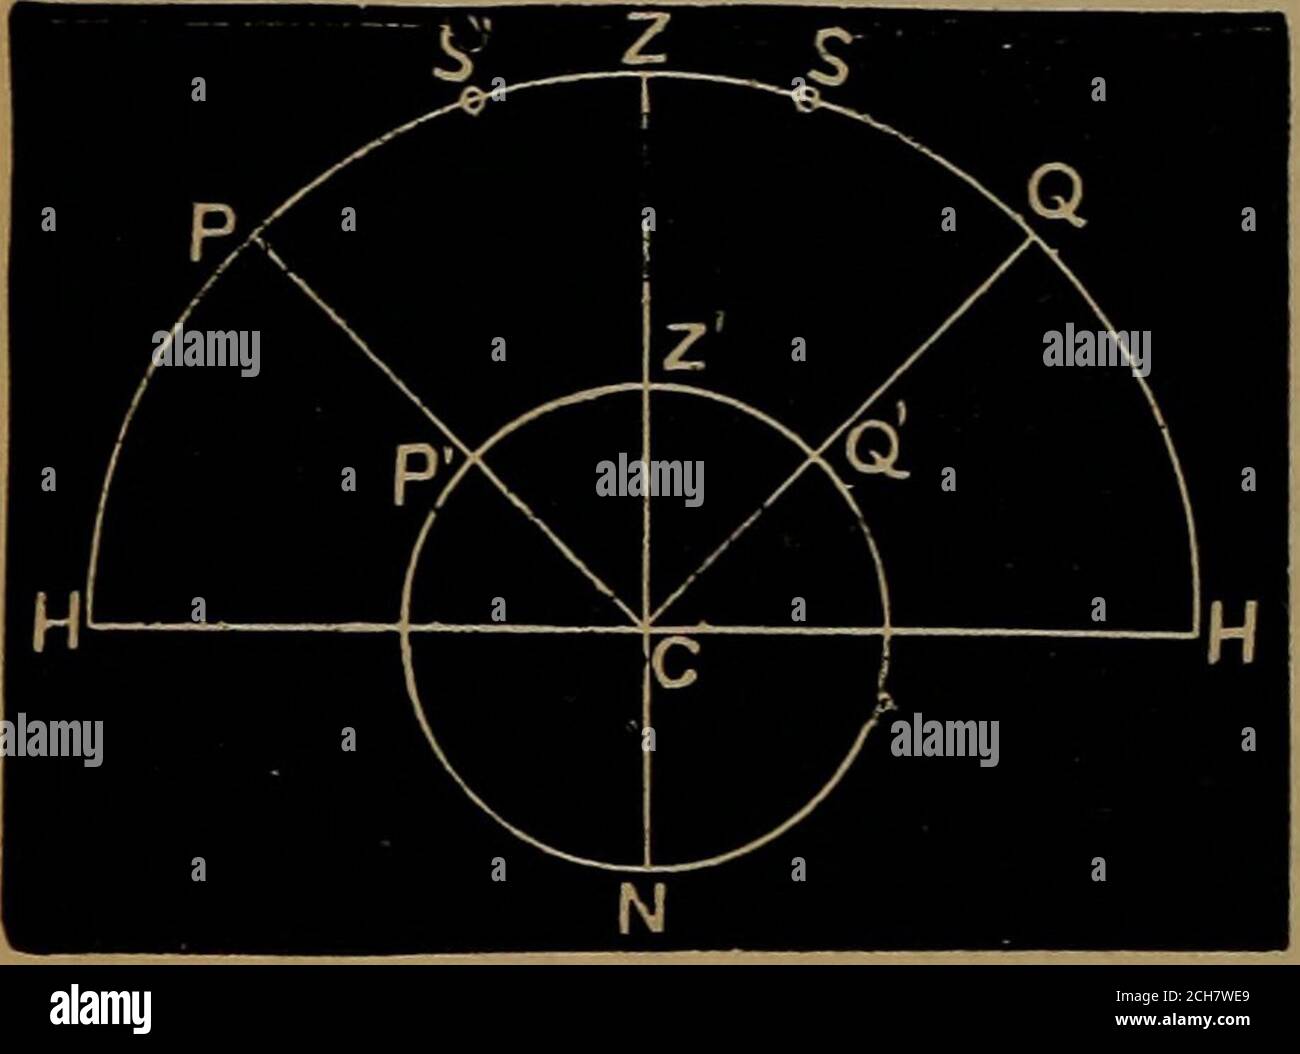 . Astronomy for high schools and colleges . and 6 are known, cross the meridian,one north and the other south of the zenith, at zenith distances Z S and Z8 which call Z and Z, andif we have measured Z and Z wecan from such measures find thelatitude ; iov (j) = 6 + Z and 0 =6 — Z, whence 9 = ^[(6 + 6)--{Z-Z) It will be noted that in this meth-od the latitude depends simplyupon the mean of two declinationswhich can be determined before-hand, and only requires the differ-FiG. 17. ence of zenith distances to be ac- curately measured, while the ab-solute values of these are unknown. In this con Stock Photo